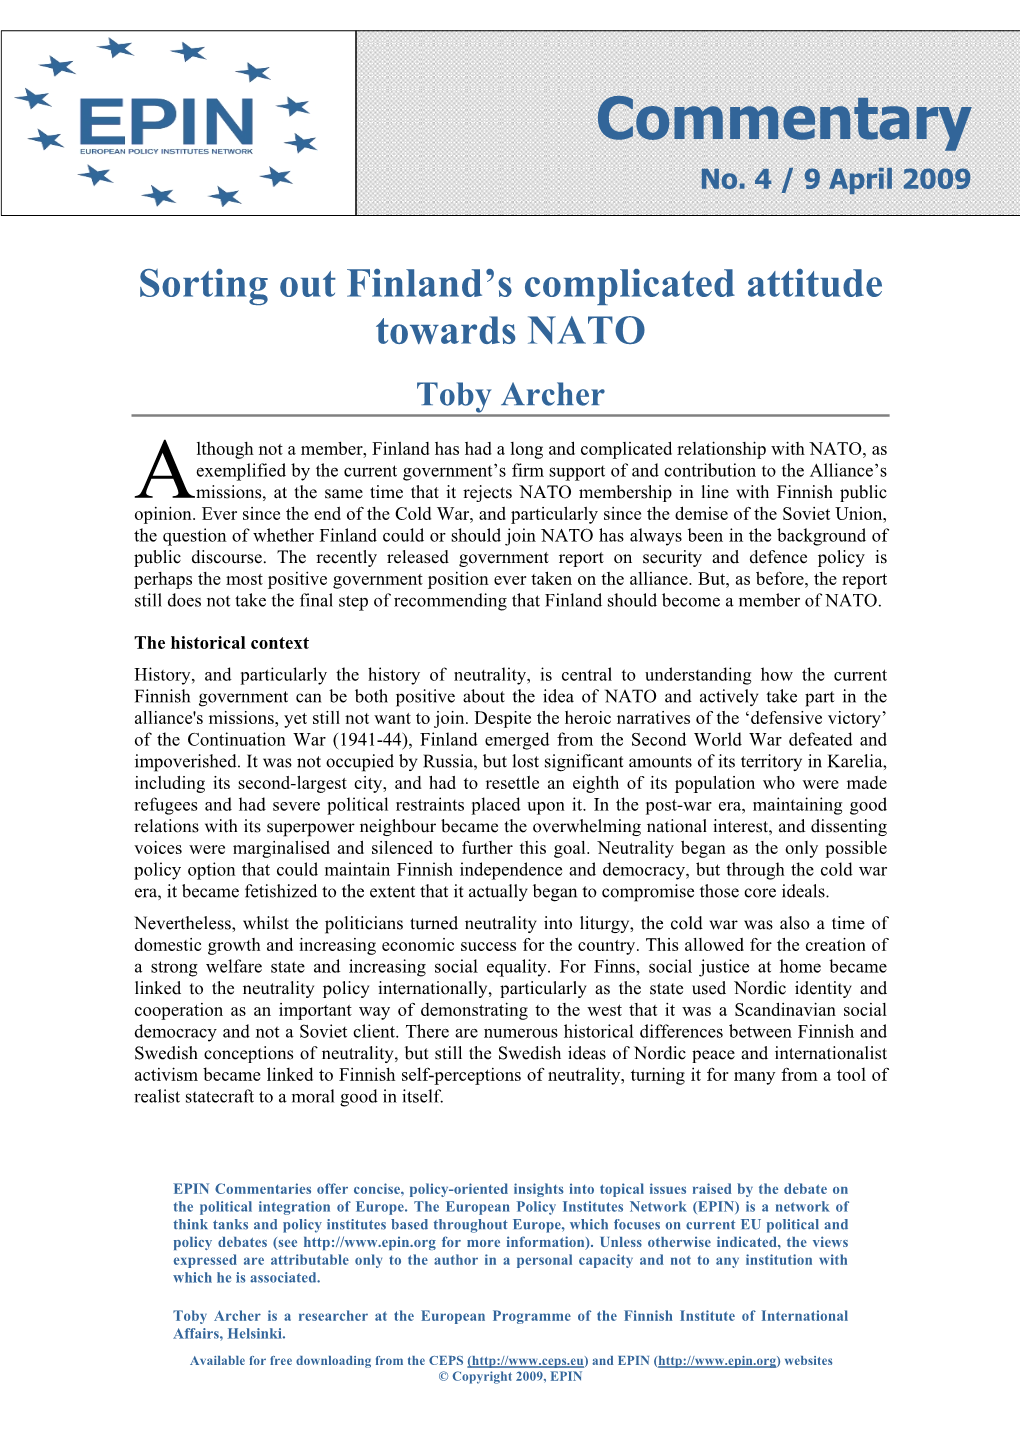 Sorting out Finland's Complicated Attitude Towards NATO